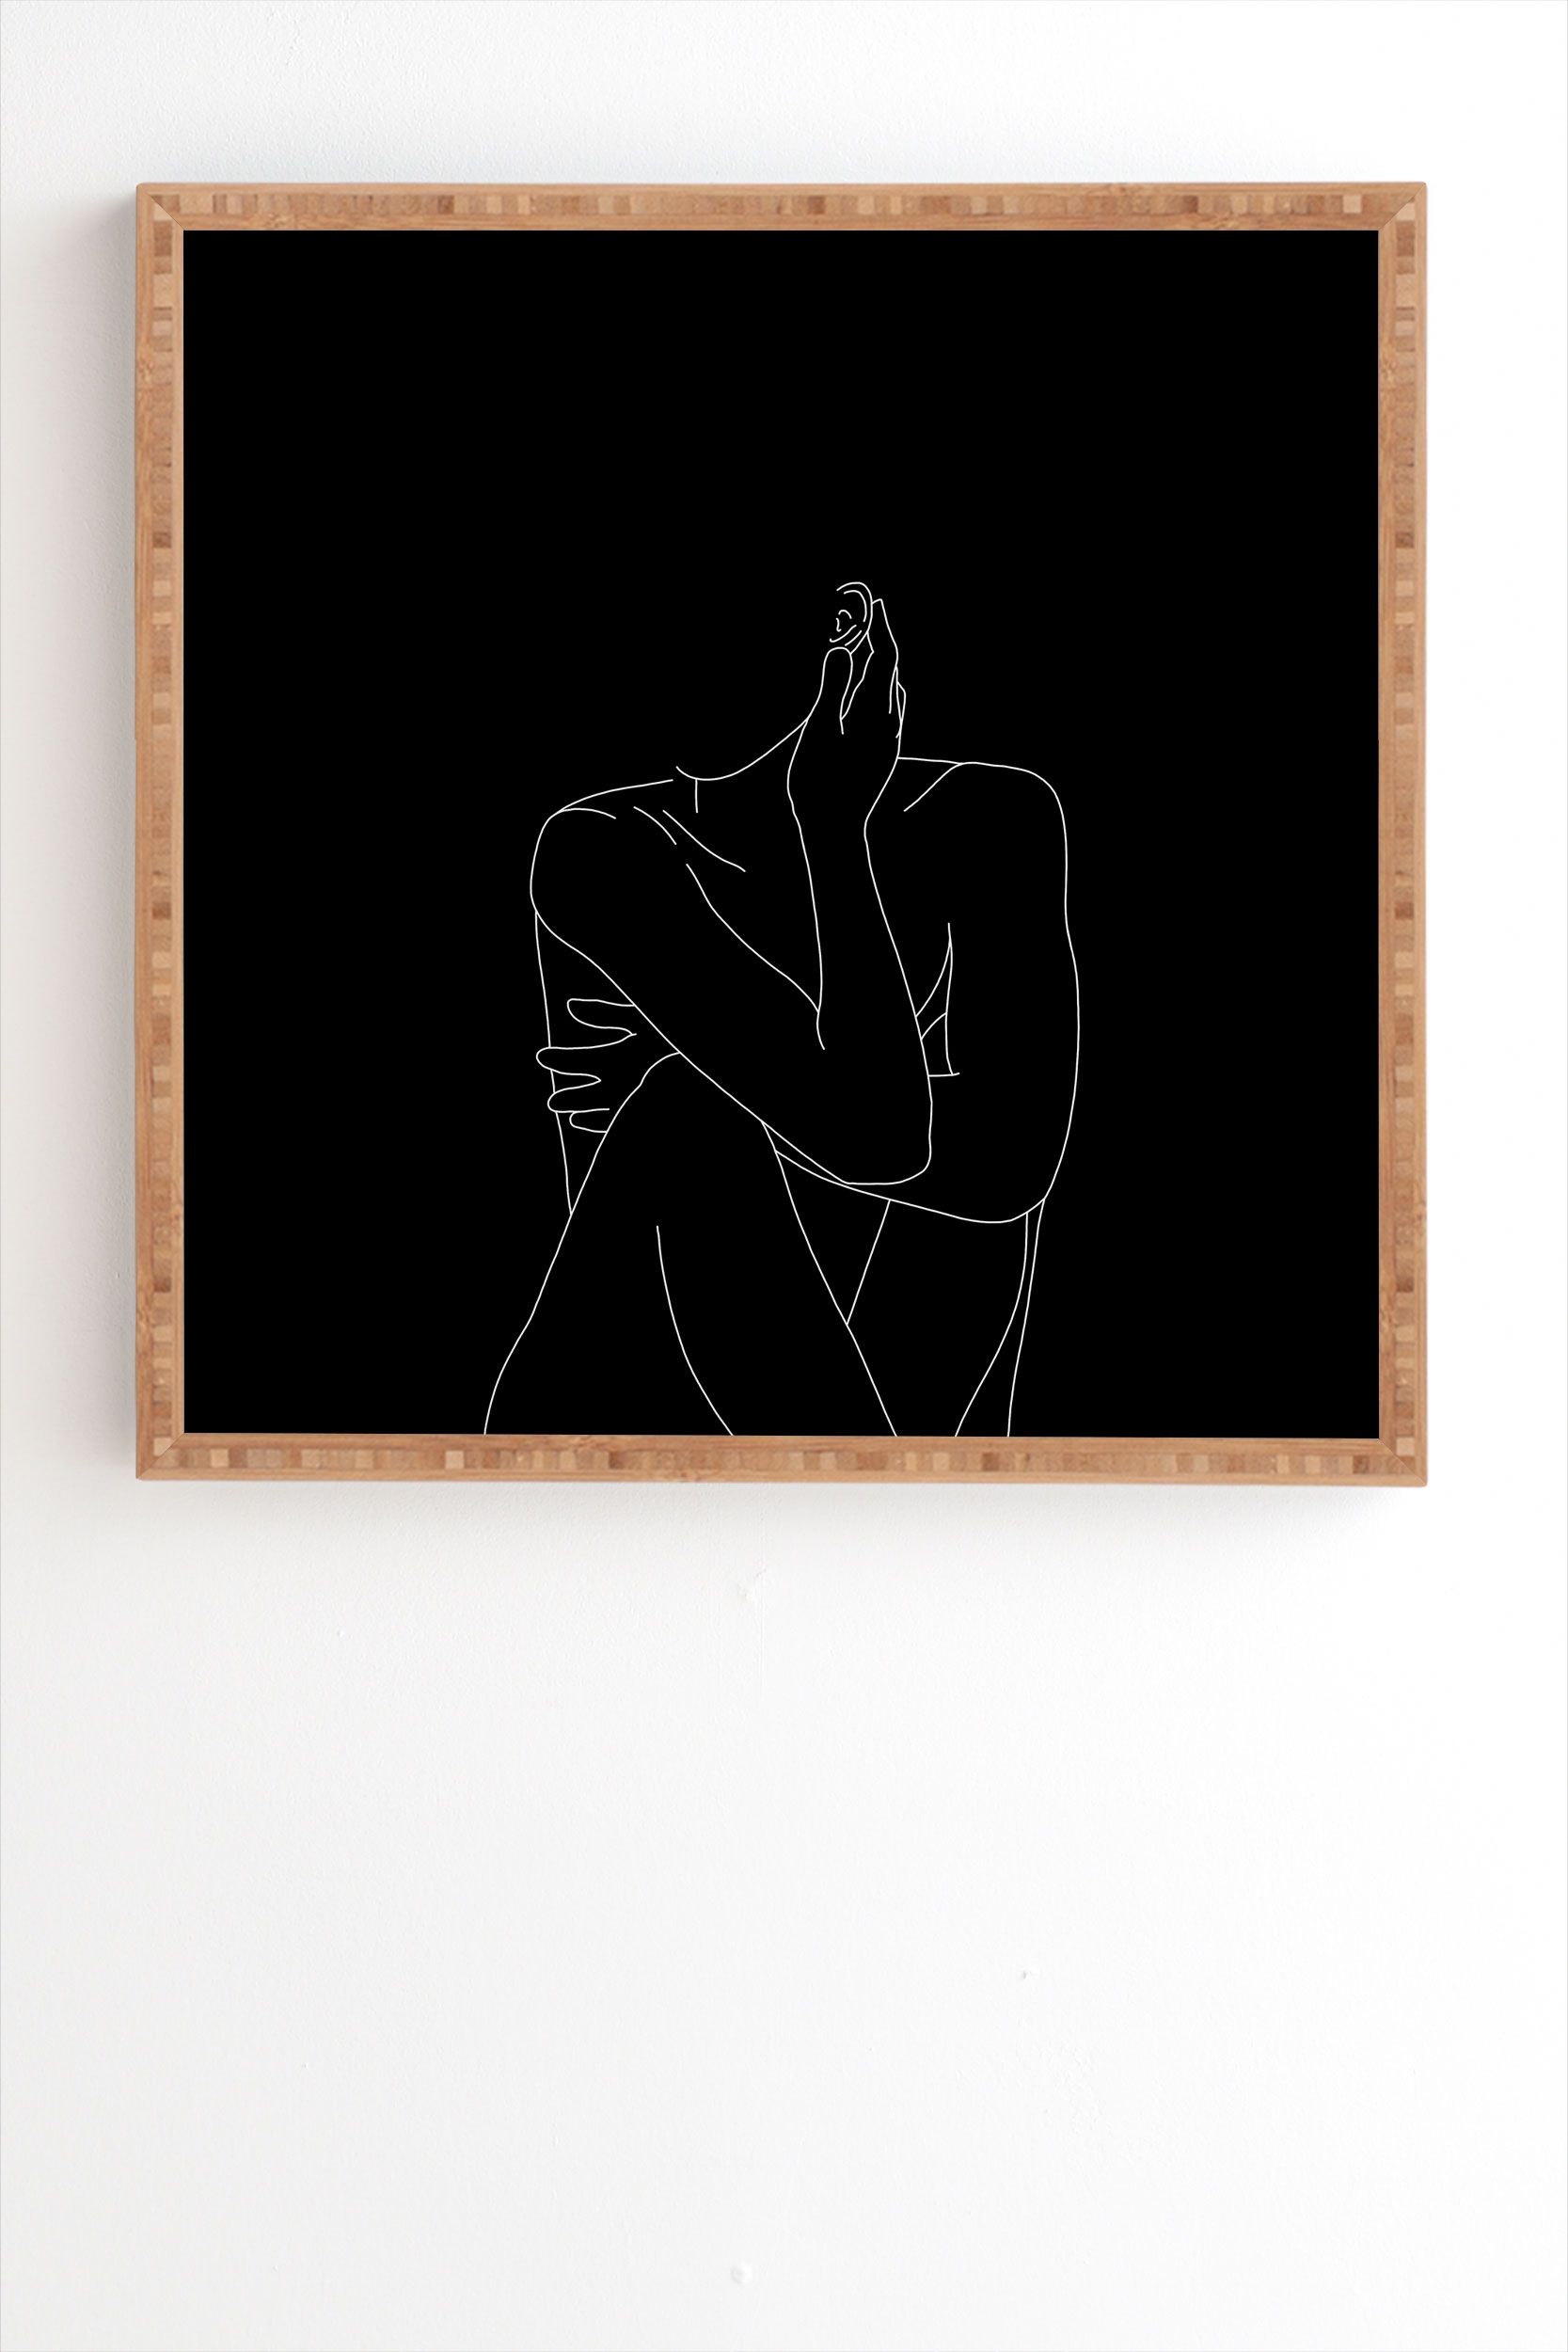 Nude Figure Illustration Celi by The Colour Study - Framed Wall Art Bamboo 19" x 22.4" - Image 1